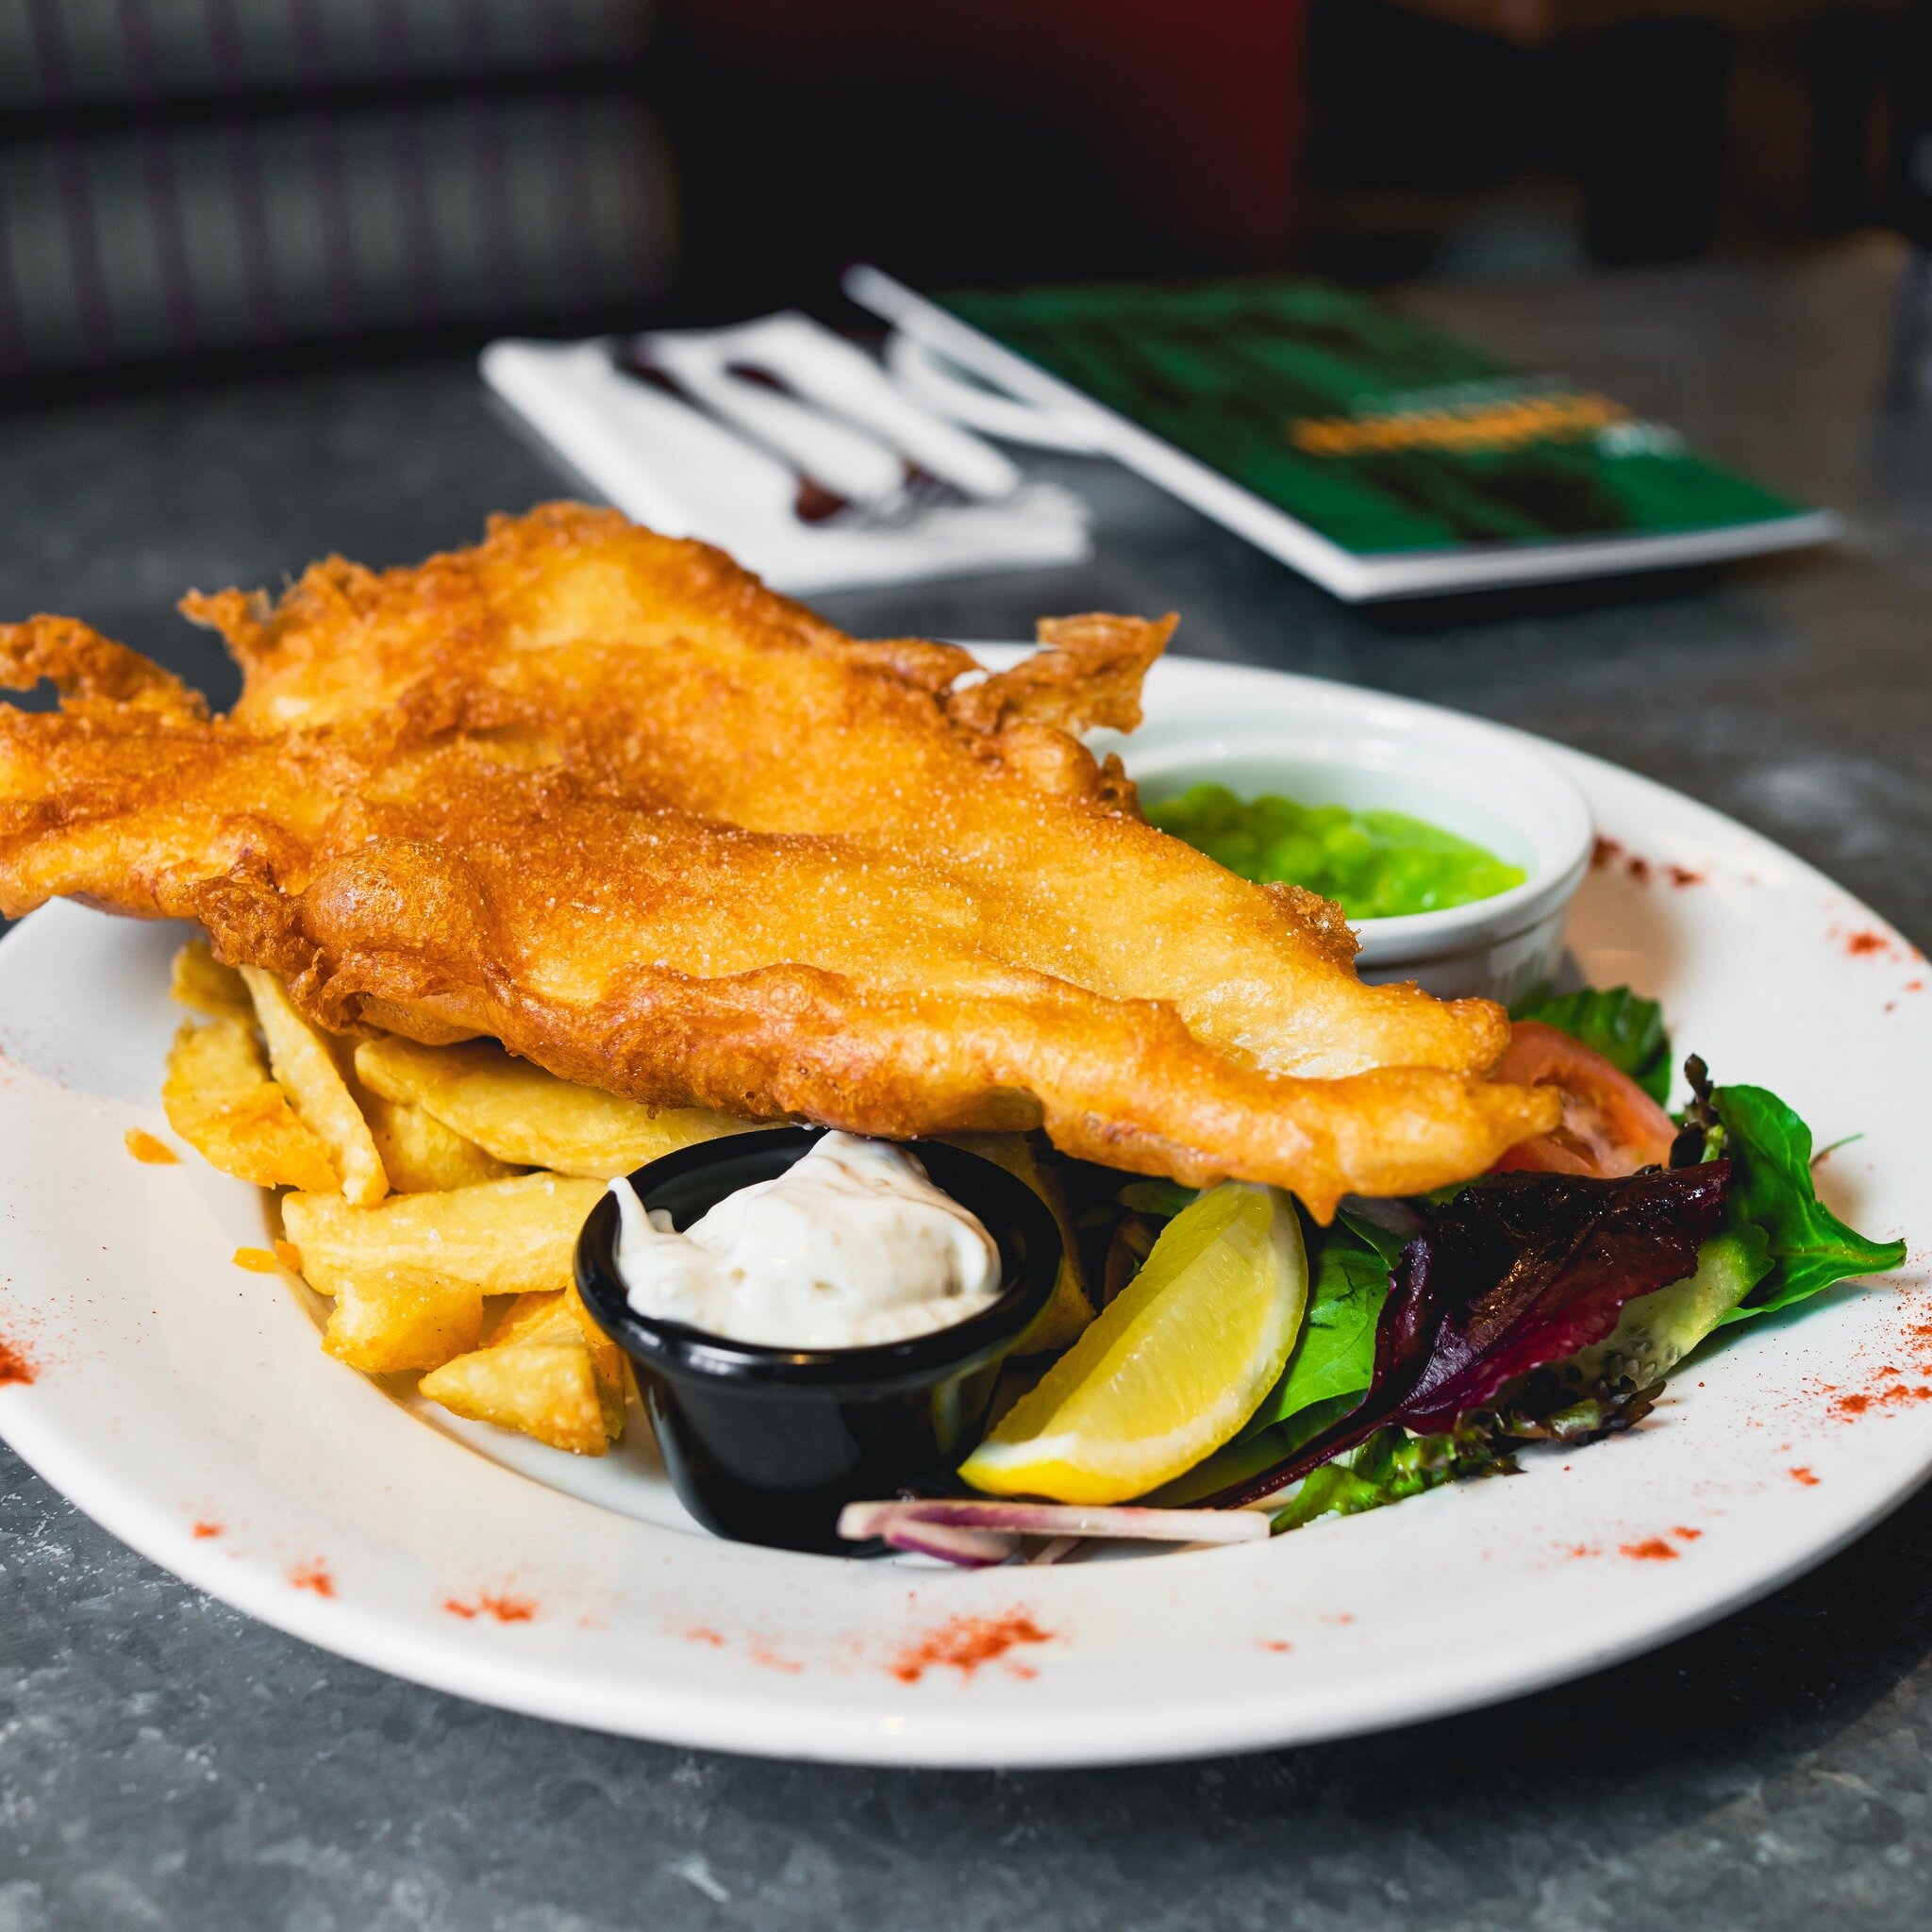 Fridays were made for fish and chips. Here at the Italian Kitchen, we coat our fresh cod in the most amazing crispy batter, just as everyone likes it. Don't forget about the chunky chips and homemade tartar sauce 😍

Bring on the weekend. Head over t